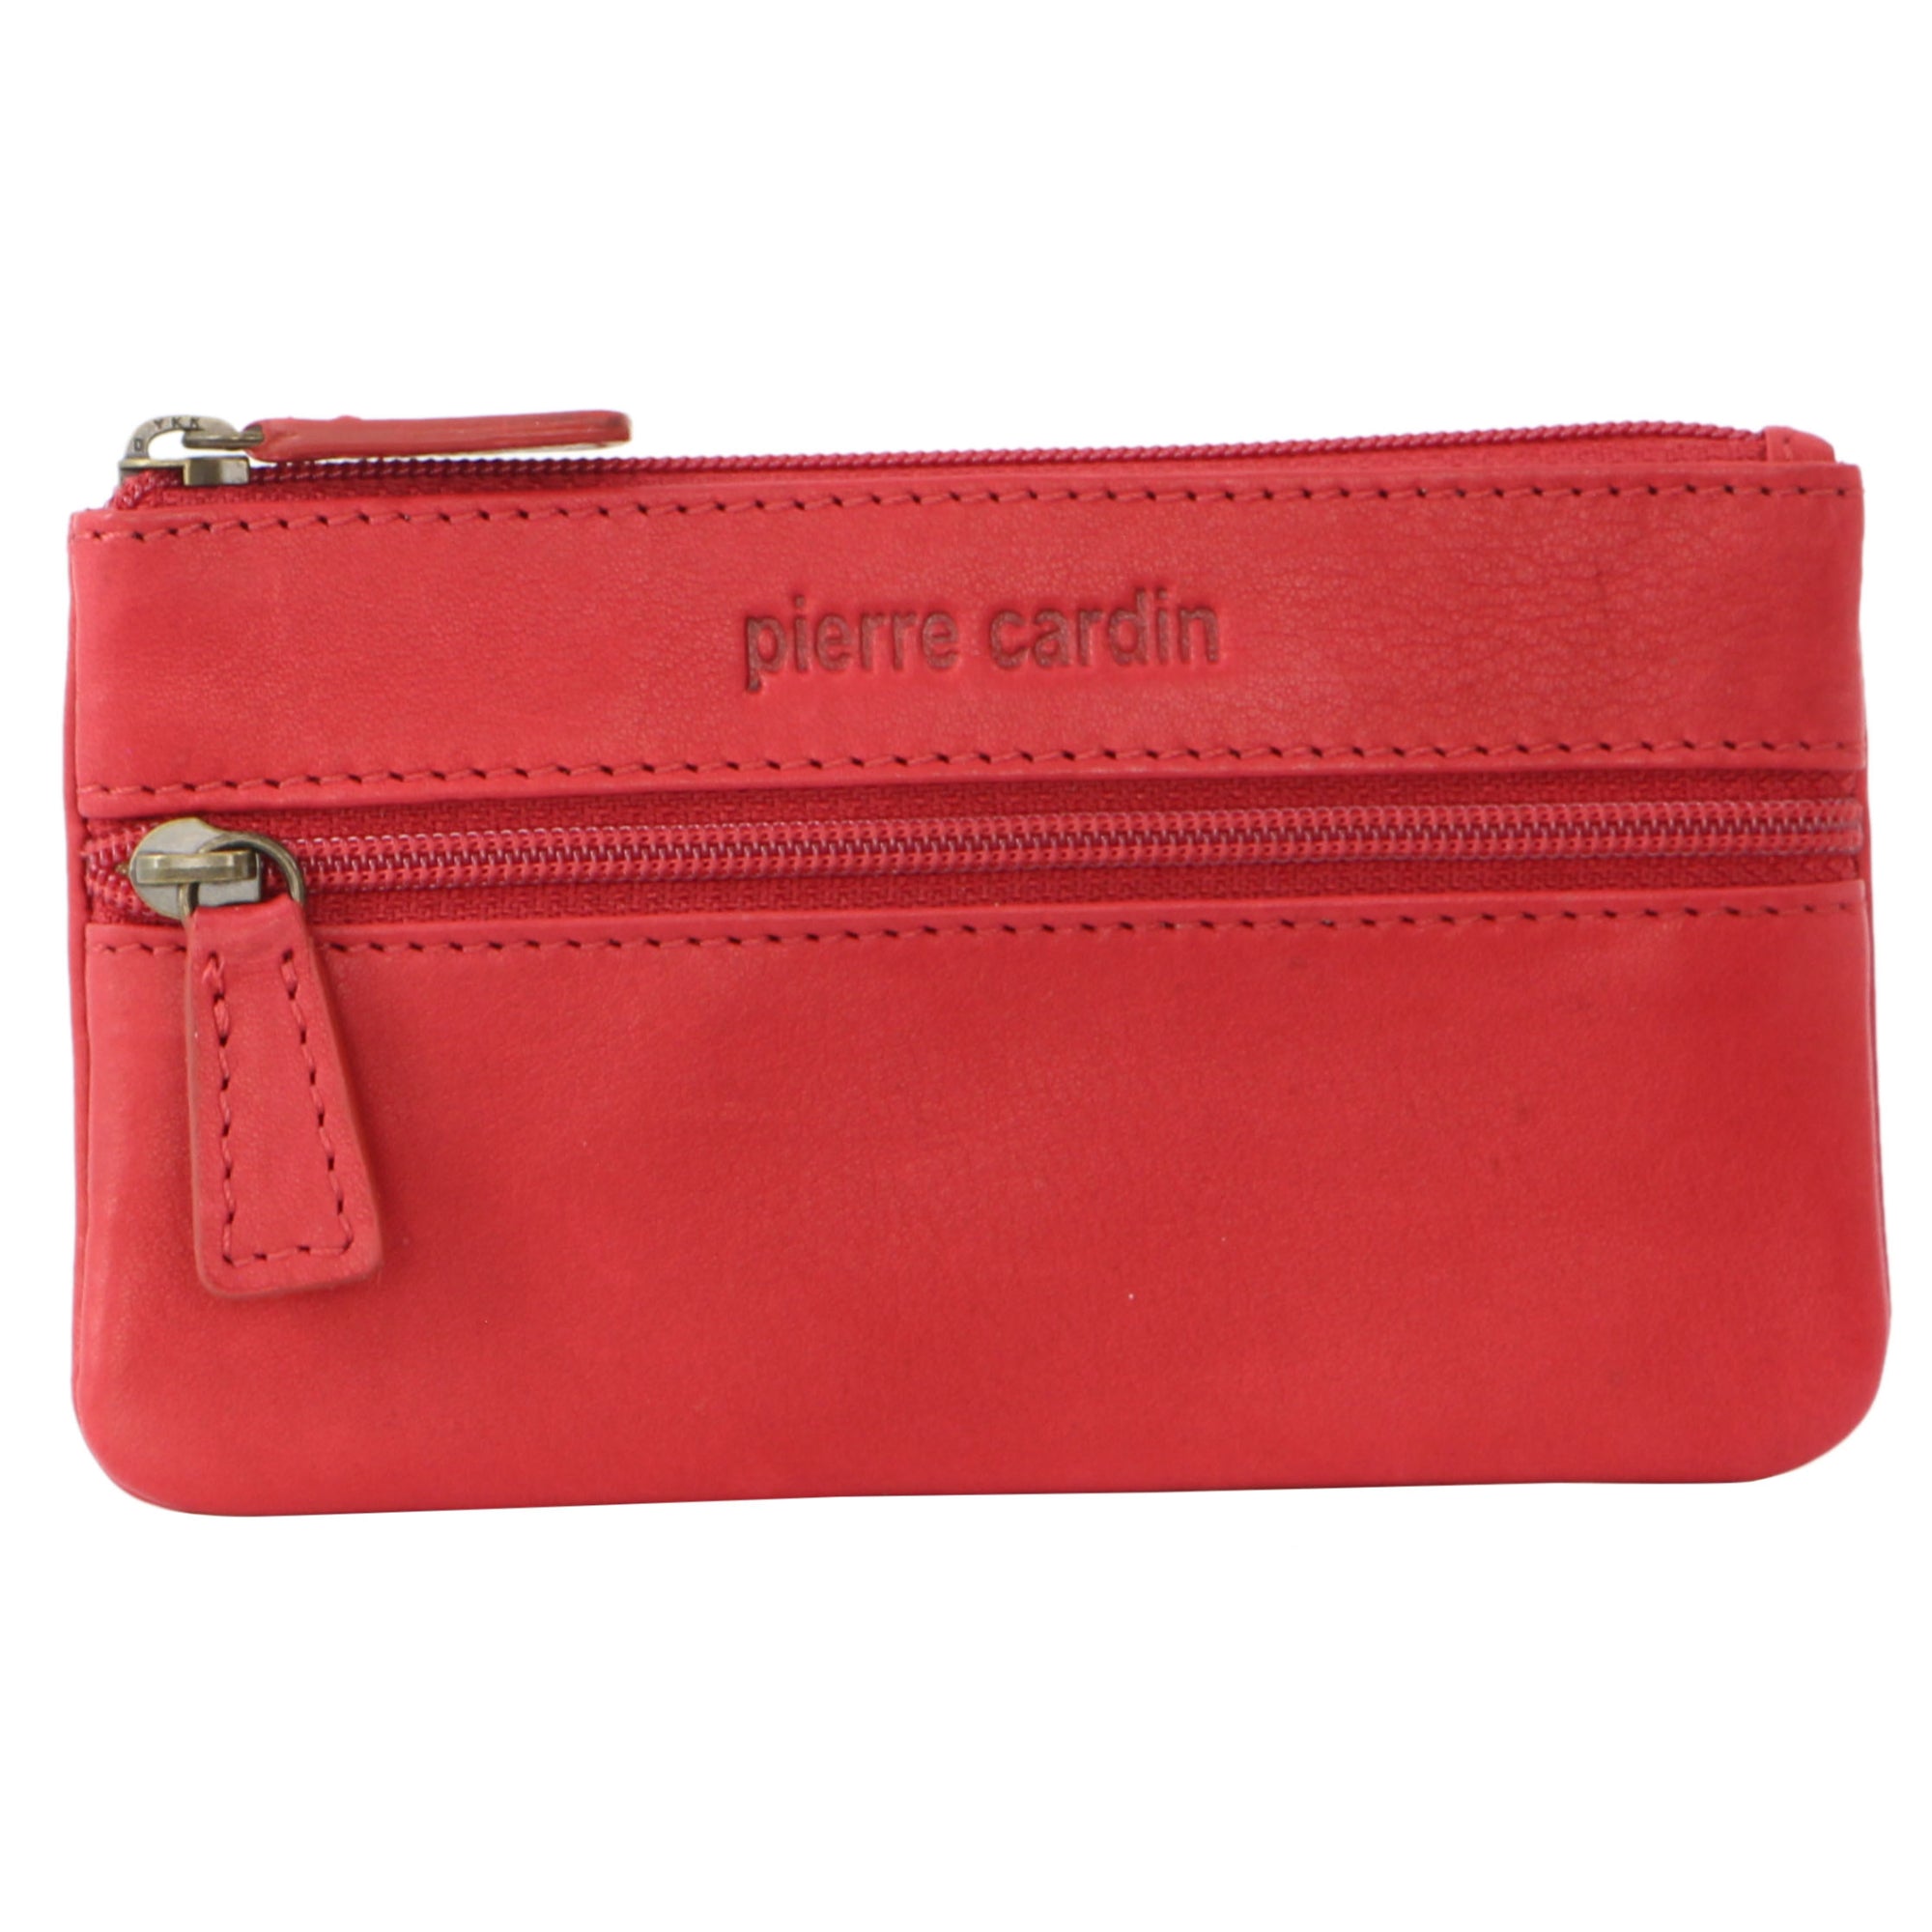 Pierre Cardin Leather Coin Purse/Key Holder in Red